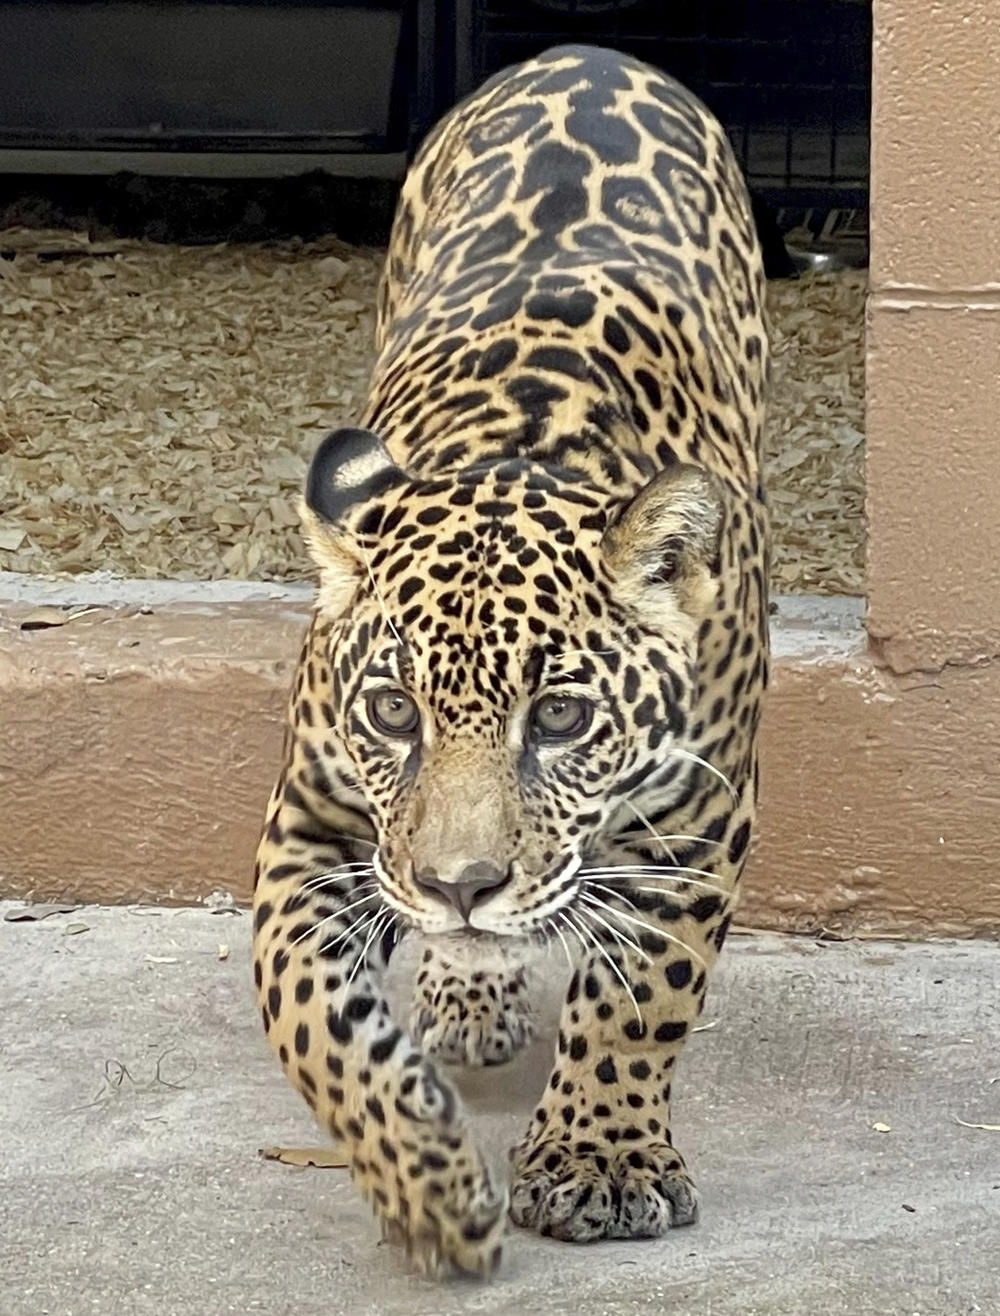 Officials from USFW asked the New Orleans Audubon Zoo to care for the cub because the zoo already has the experience and equipment to house jaguars.